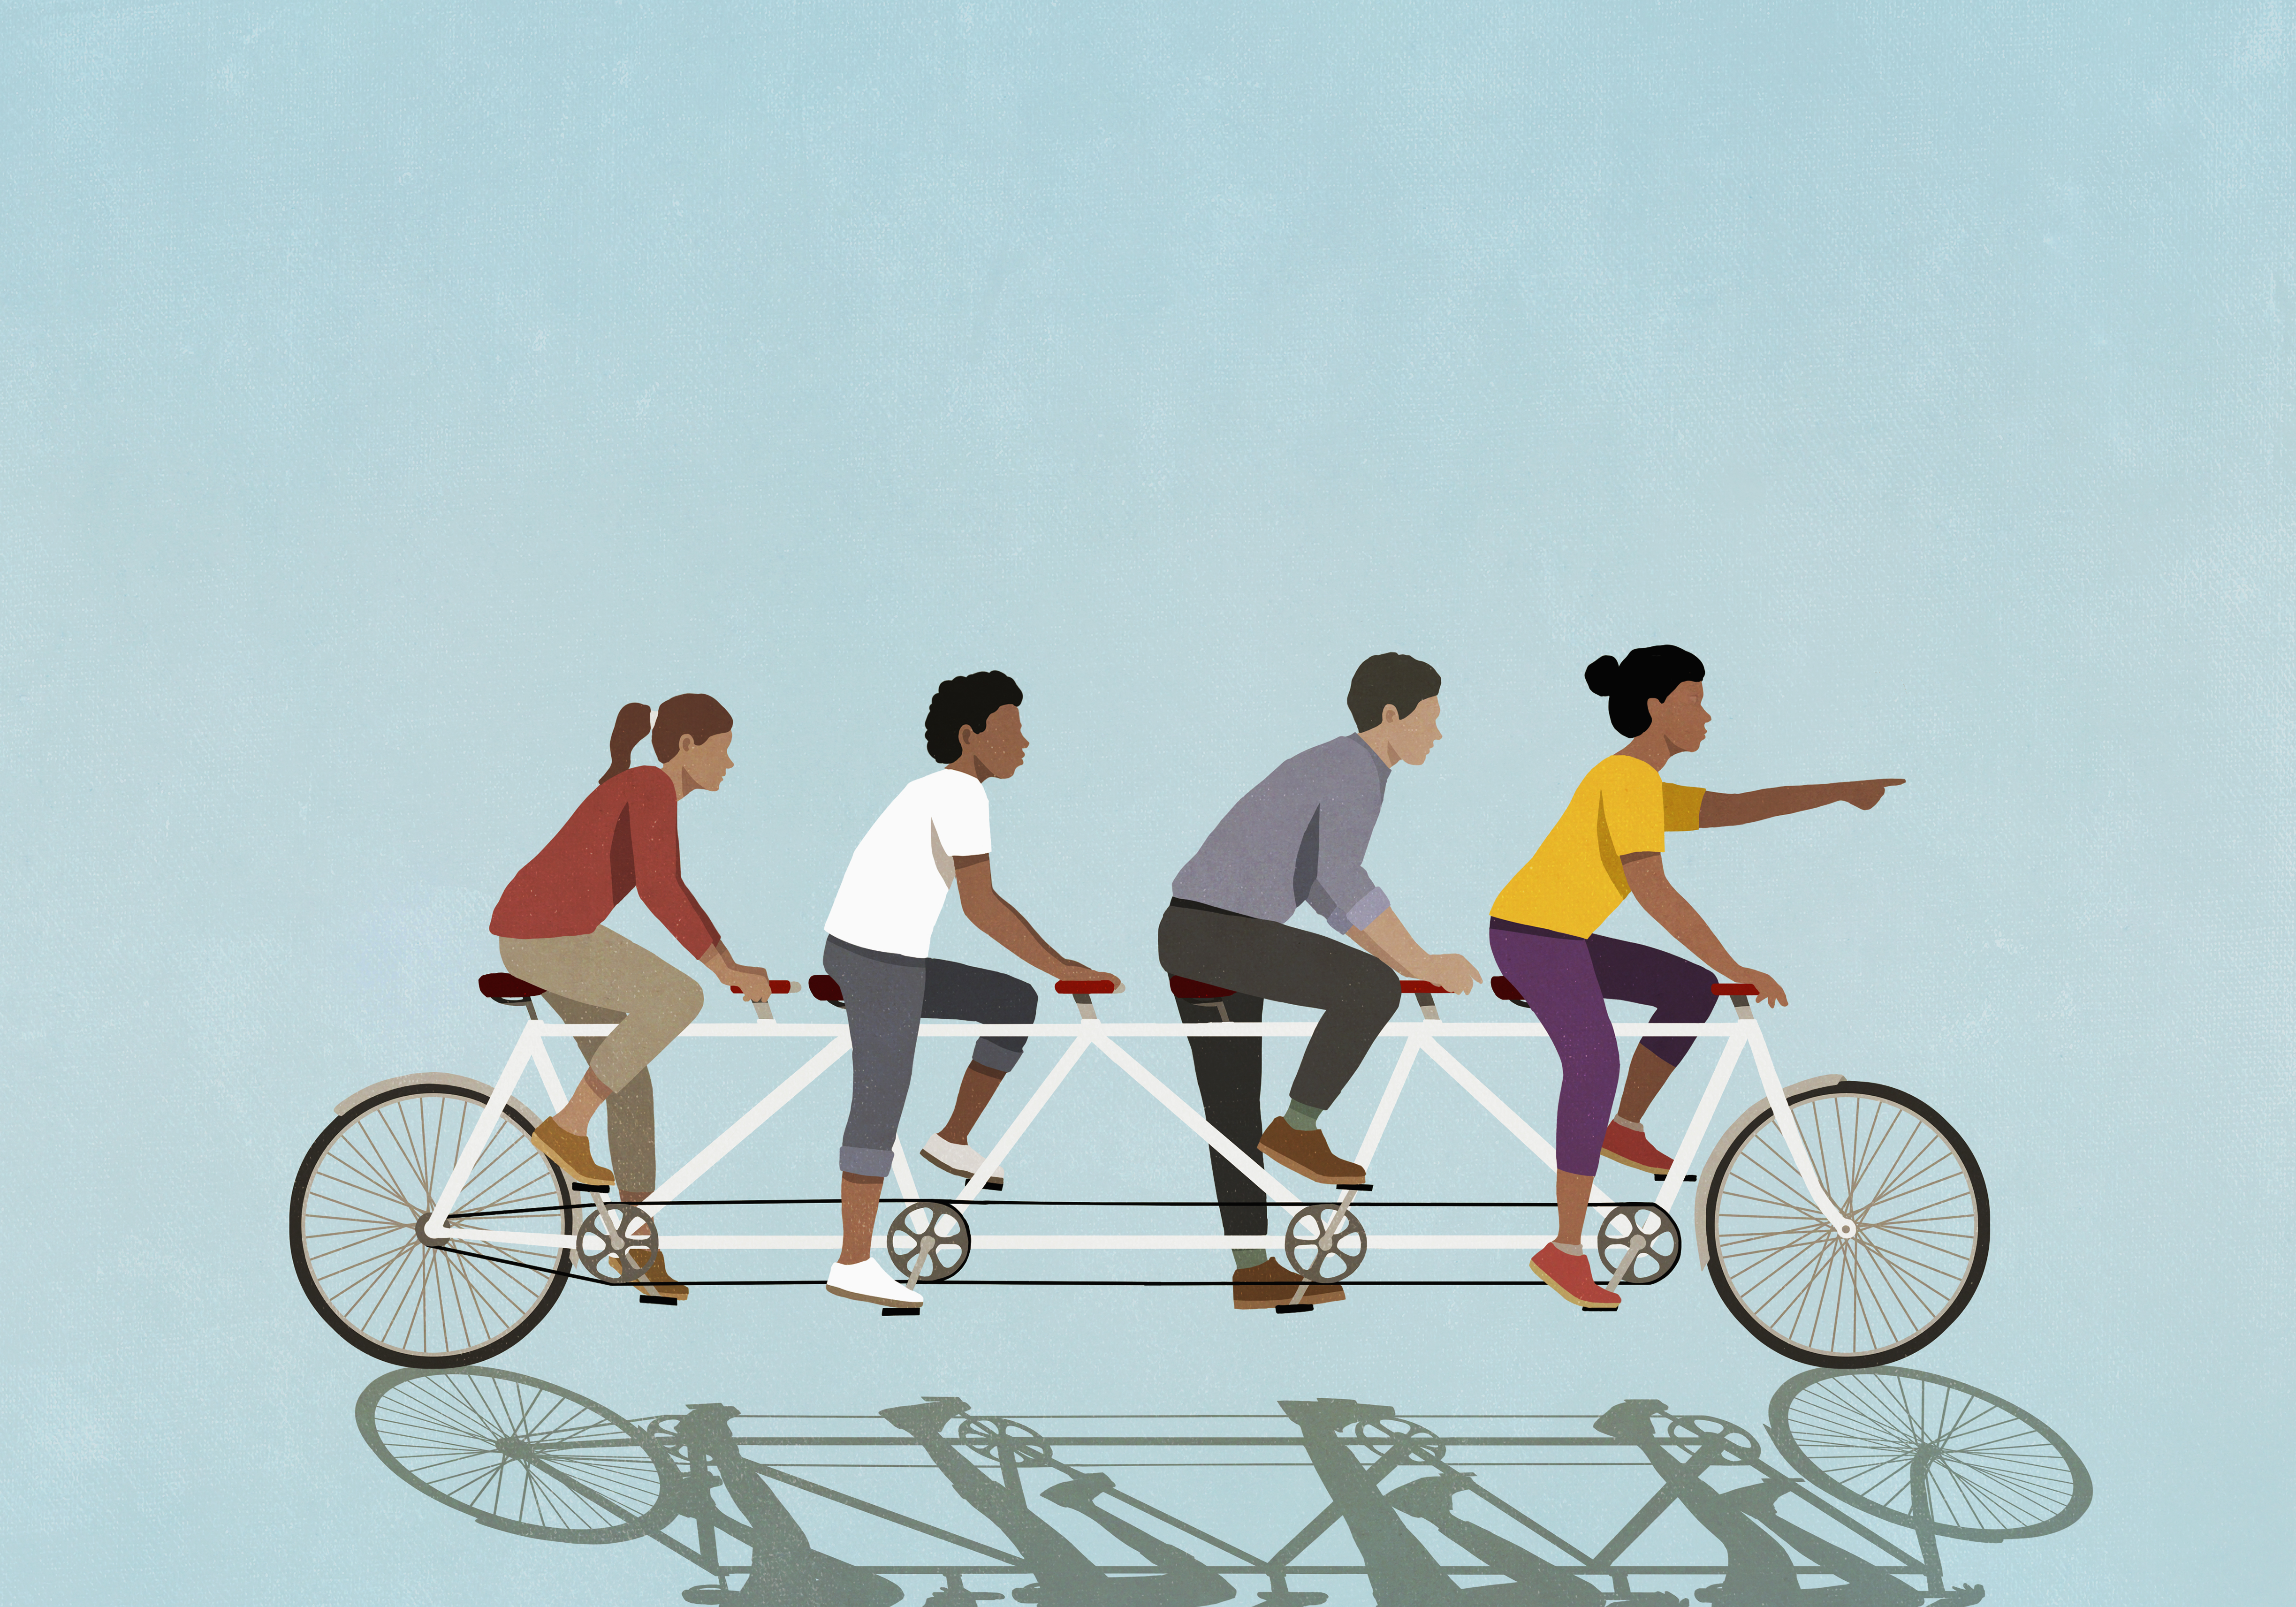 Illustration of friends riding a tandem bicycle on a blue background.